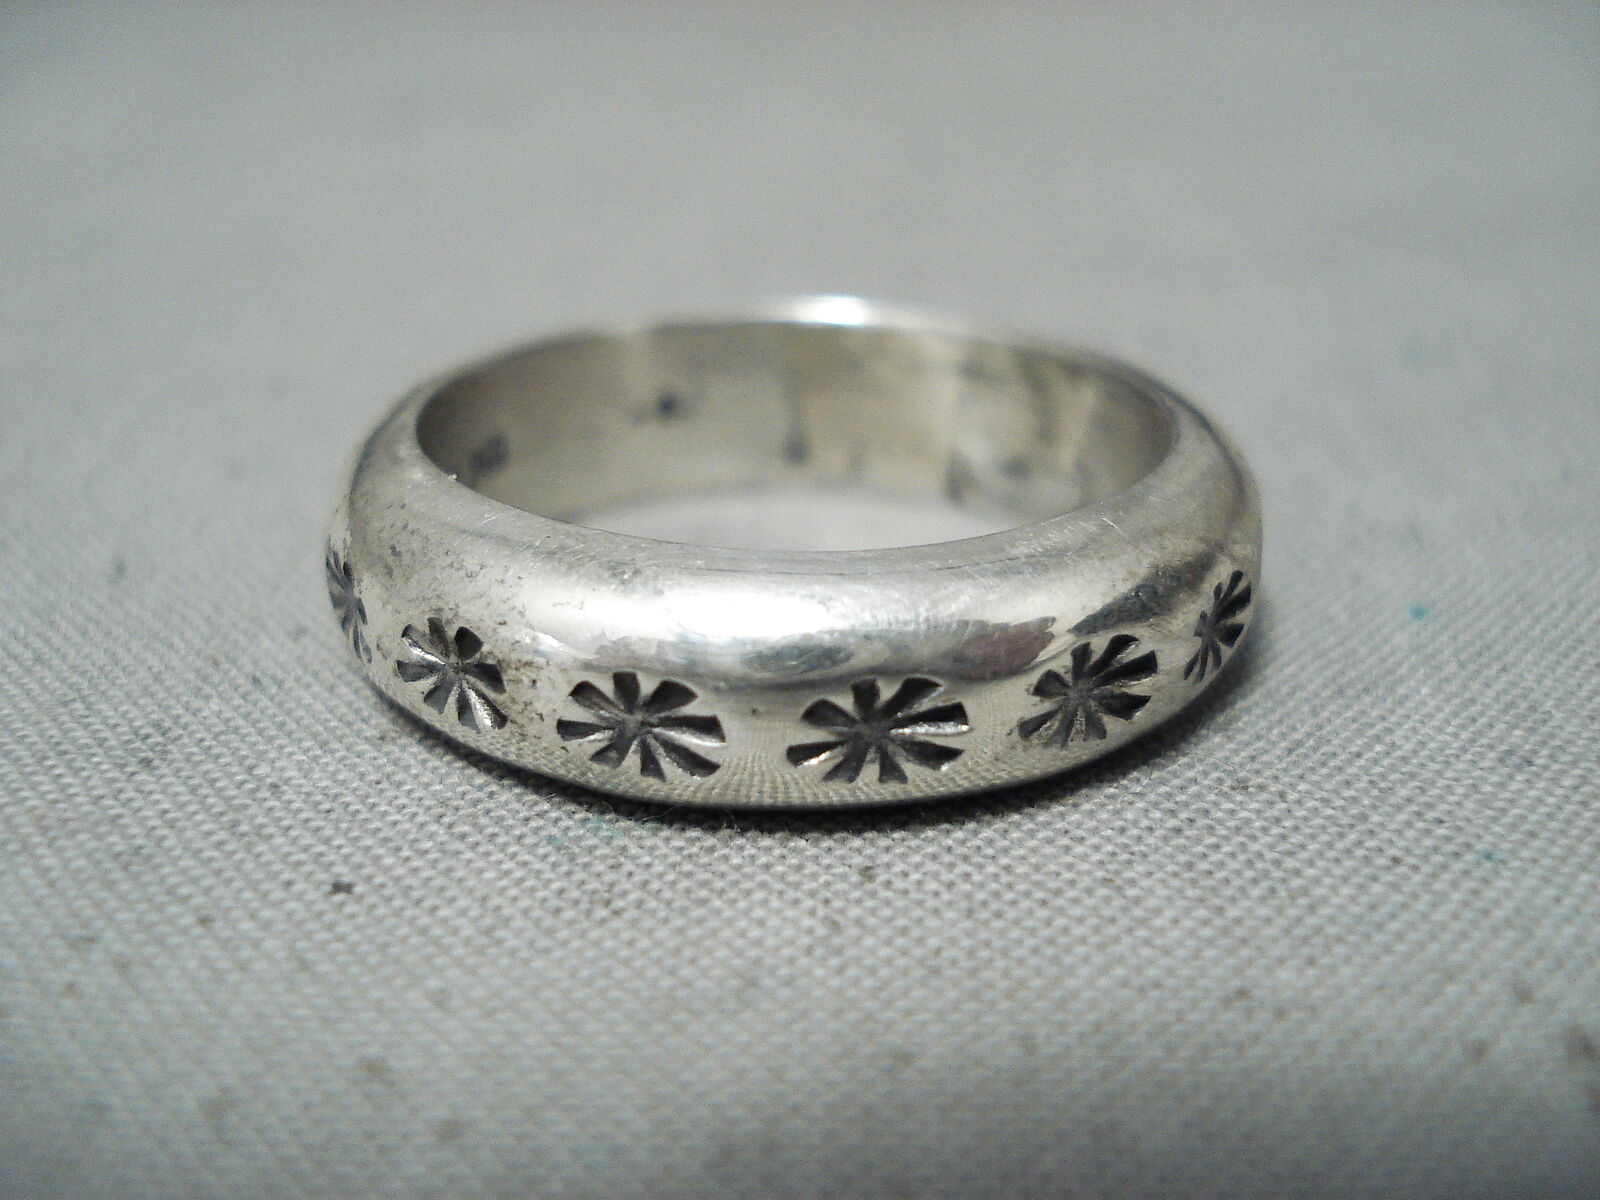 WONDERFUL NAVAJO SIGNED STERLING SILVER RING